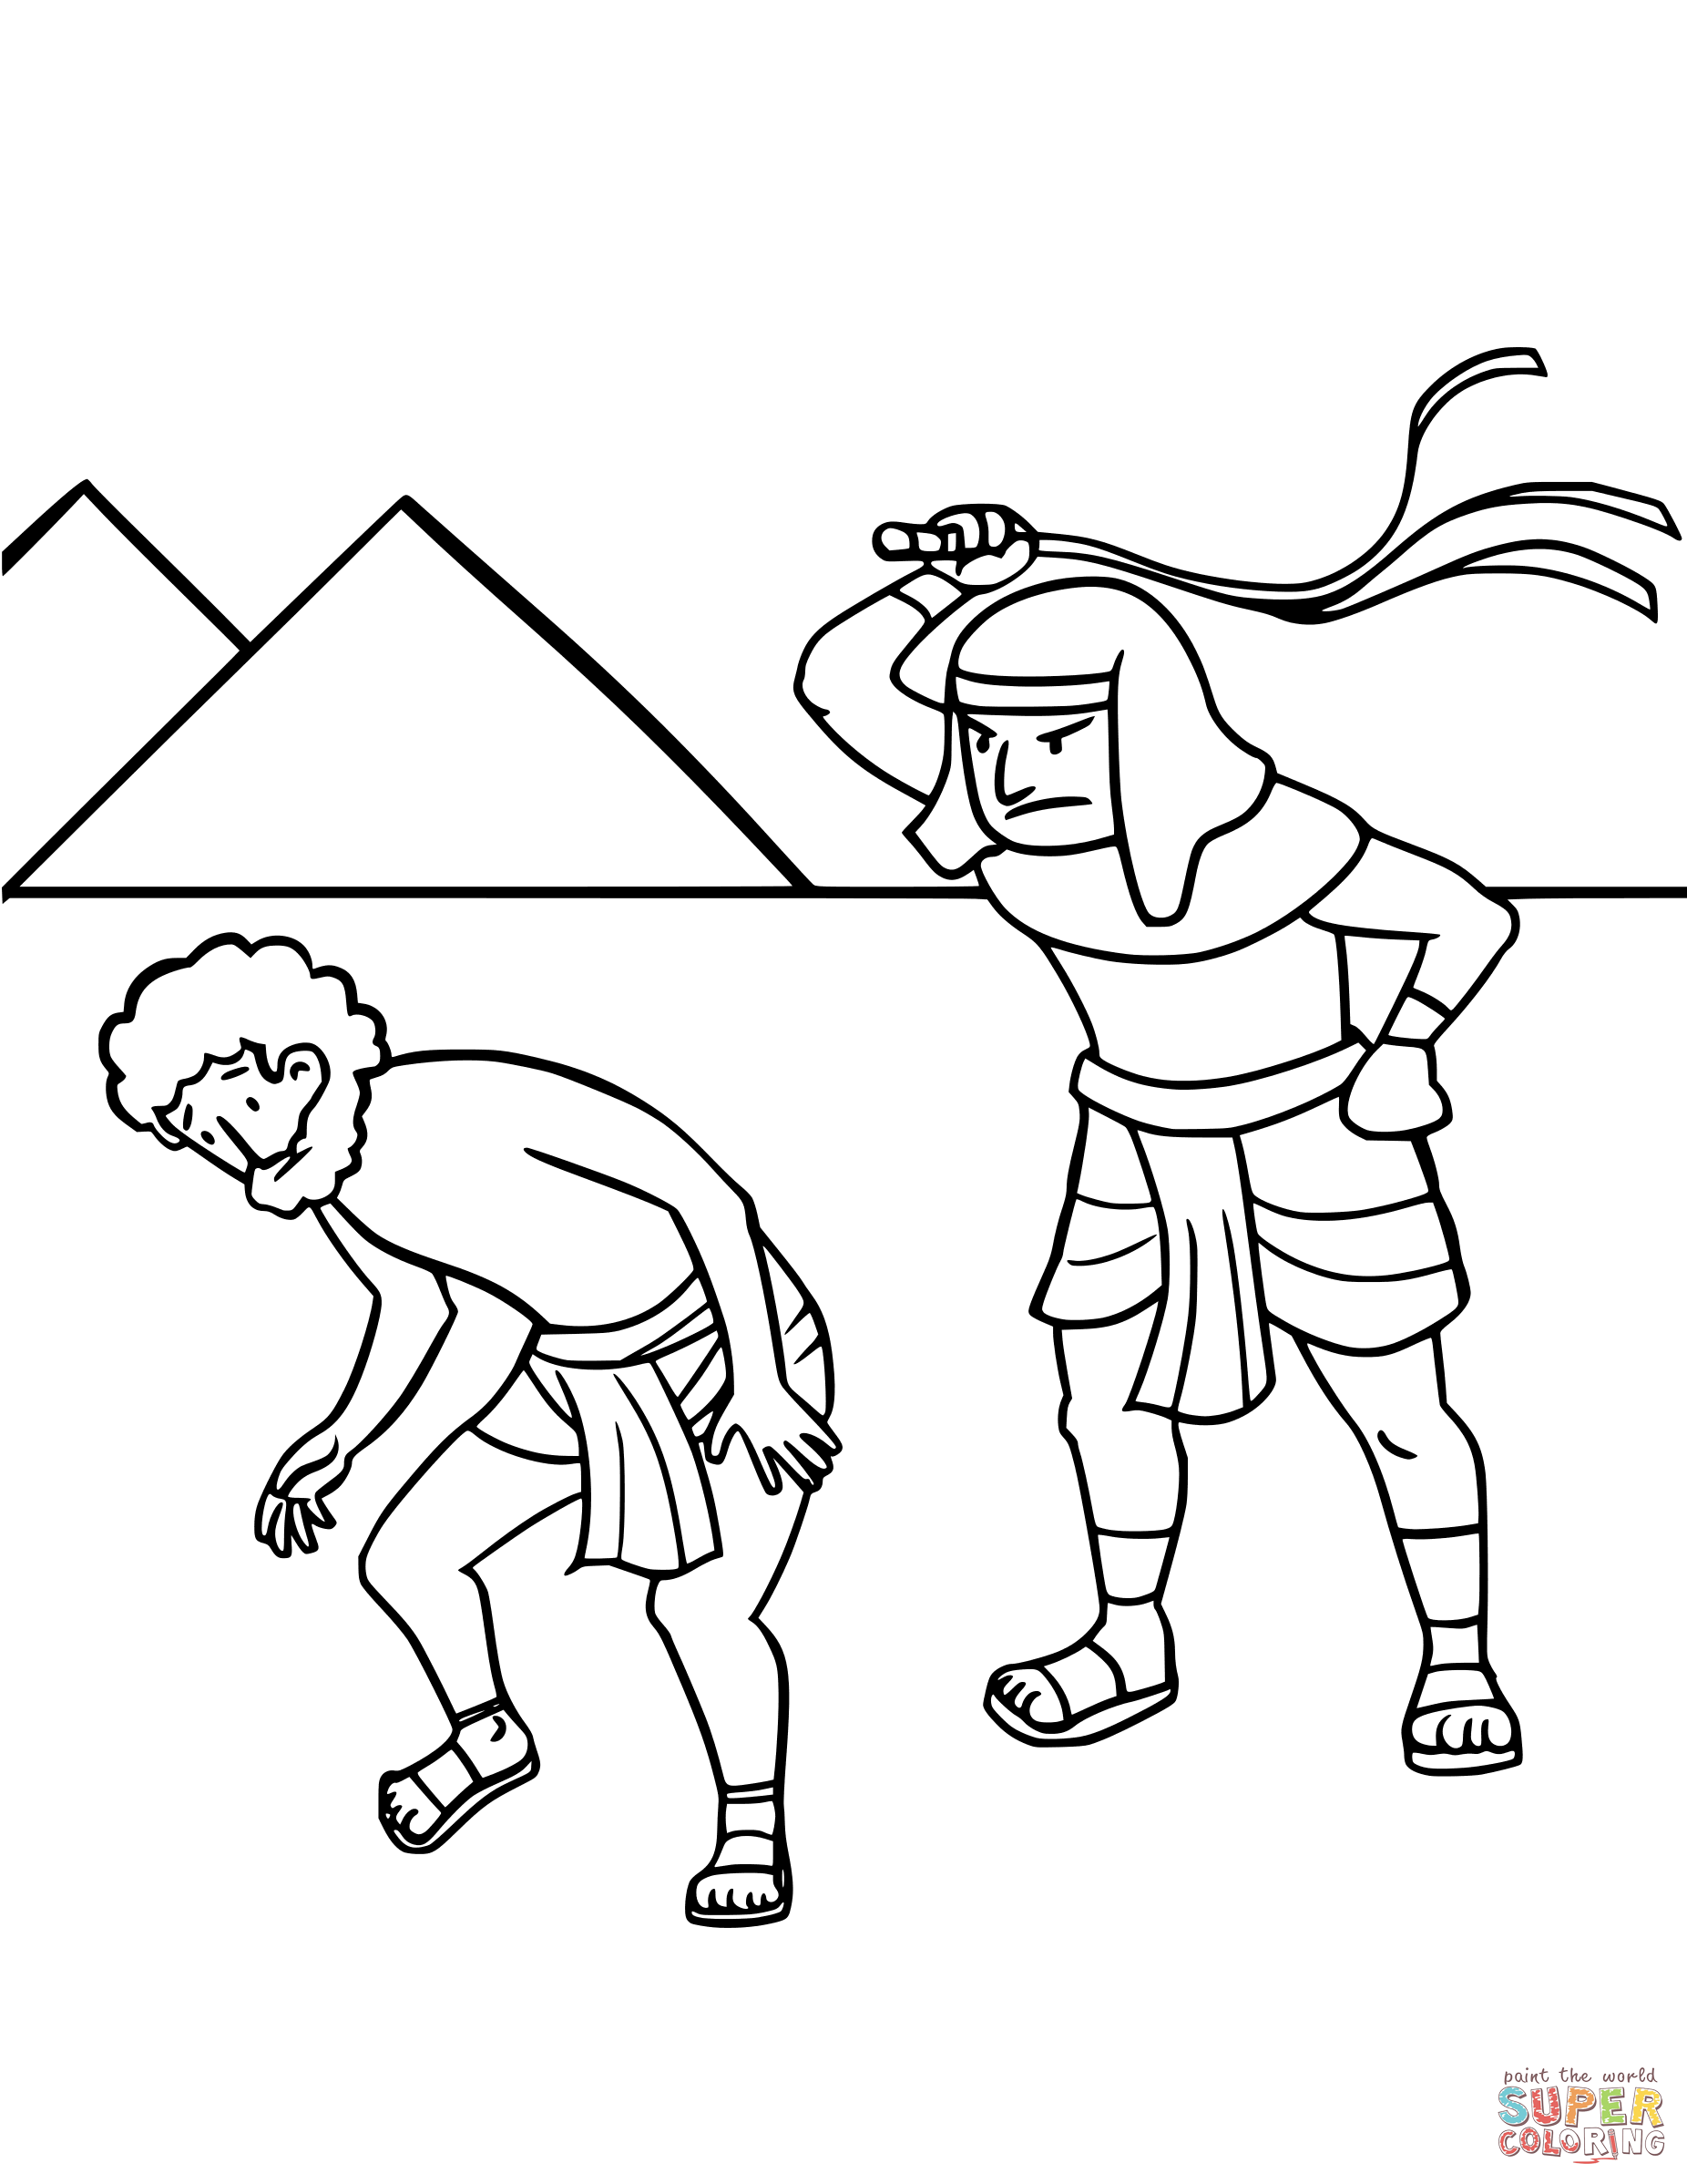 Israel's Enslavement in Egypt coloring page | Free Printable Coloring Pages